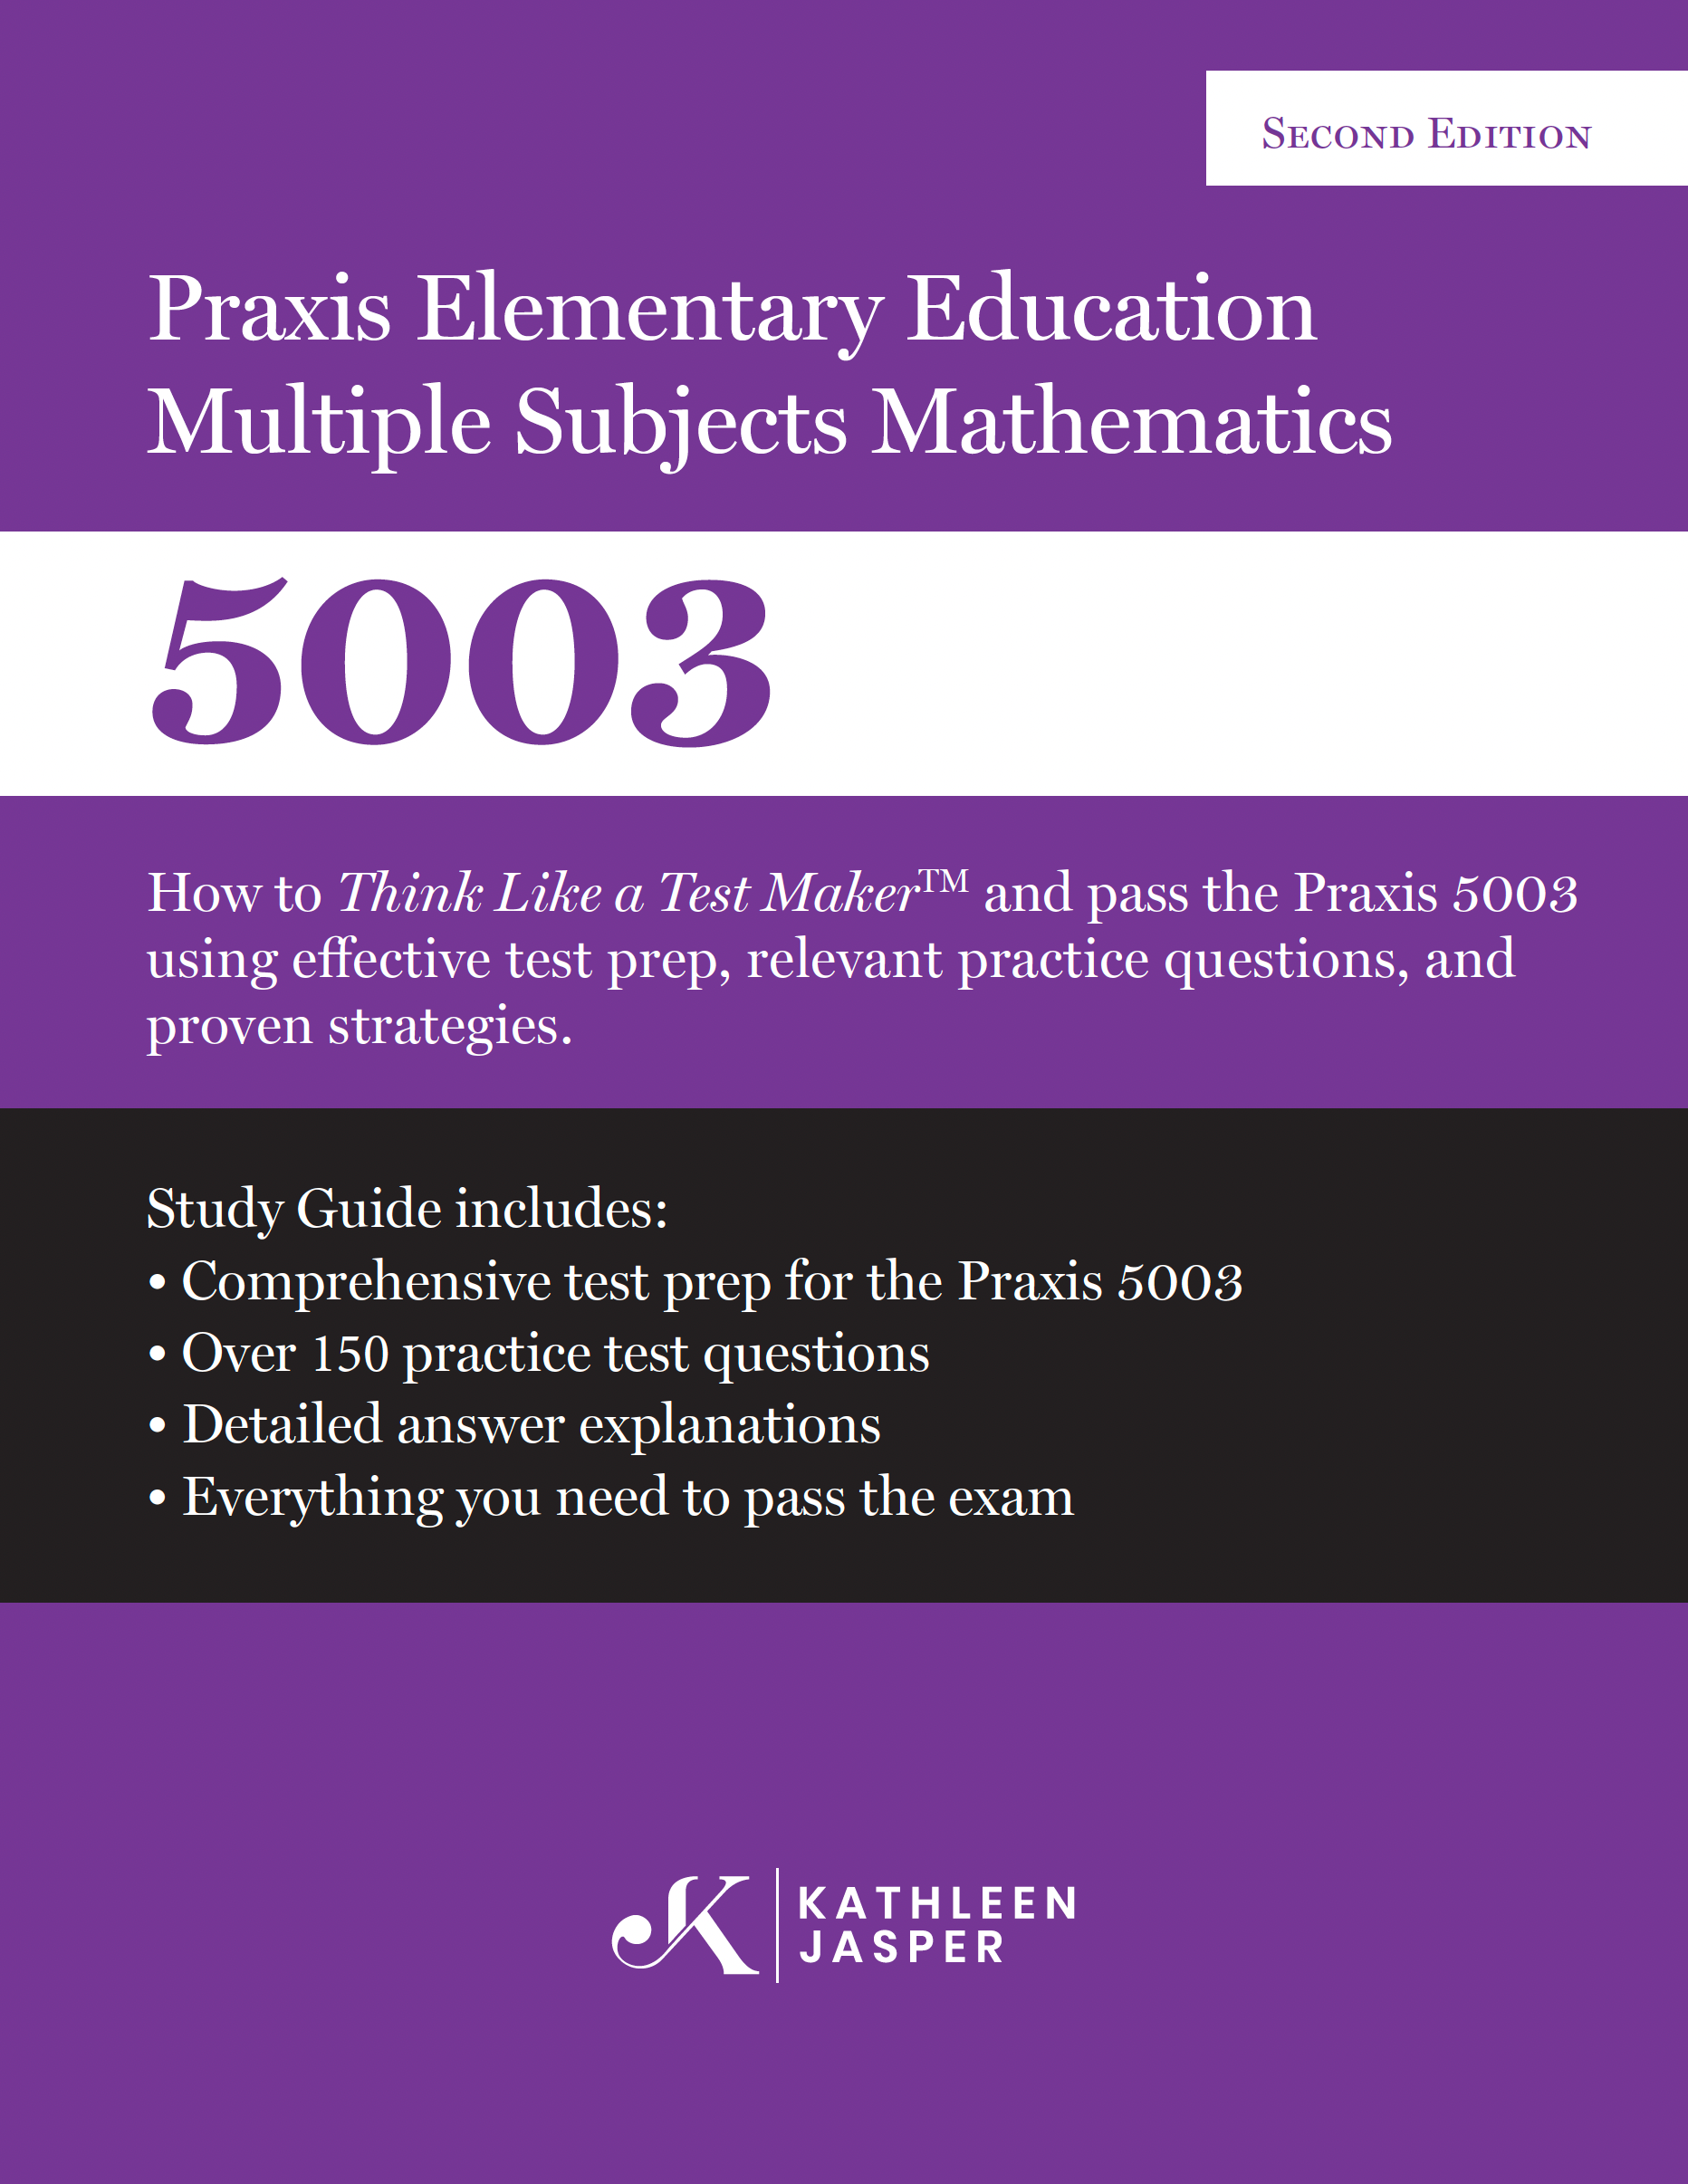 Praxis II Elementary Education 5001: Multiple Subjects Digital Study Guides (Second Edition)